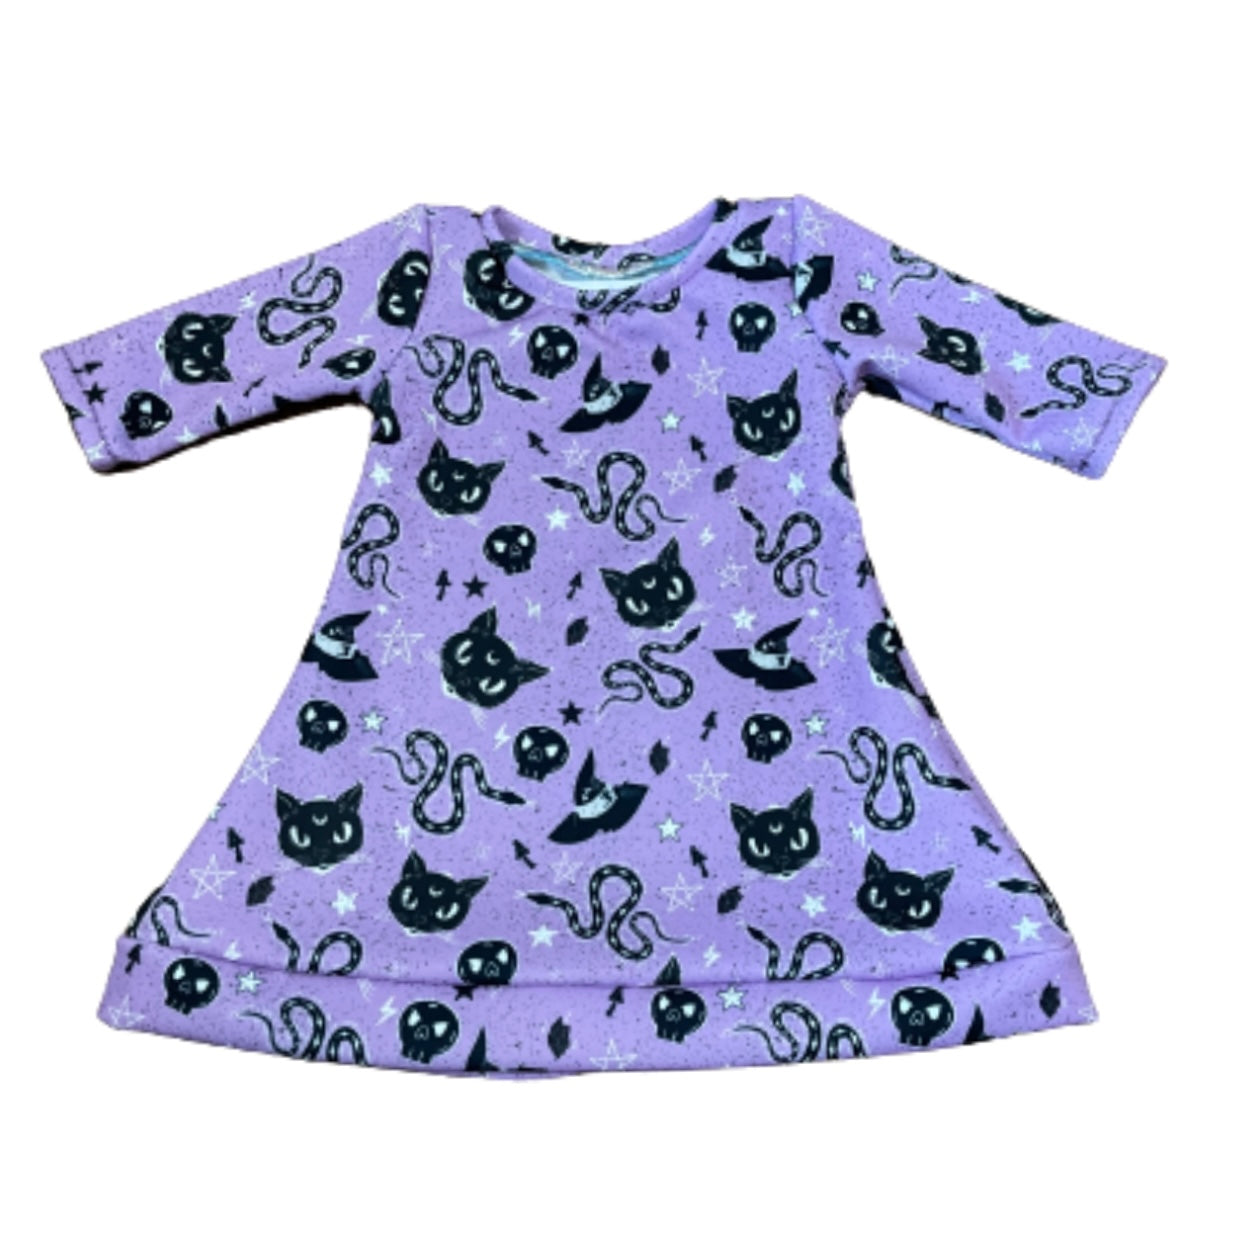 Spooky Cat - Tunic 3/4 sleeves - 4t